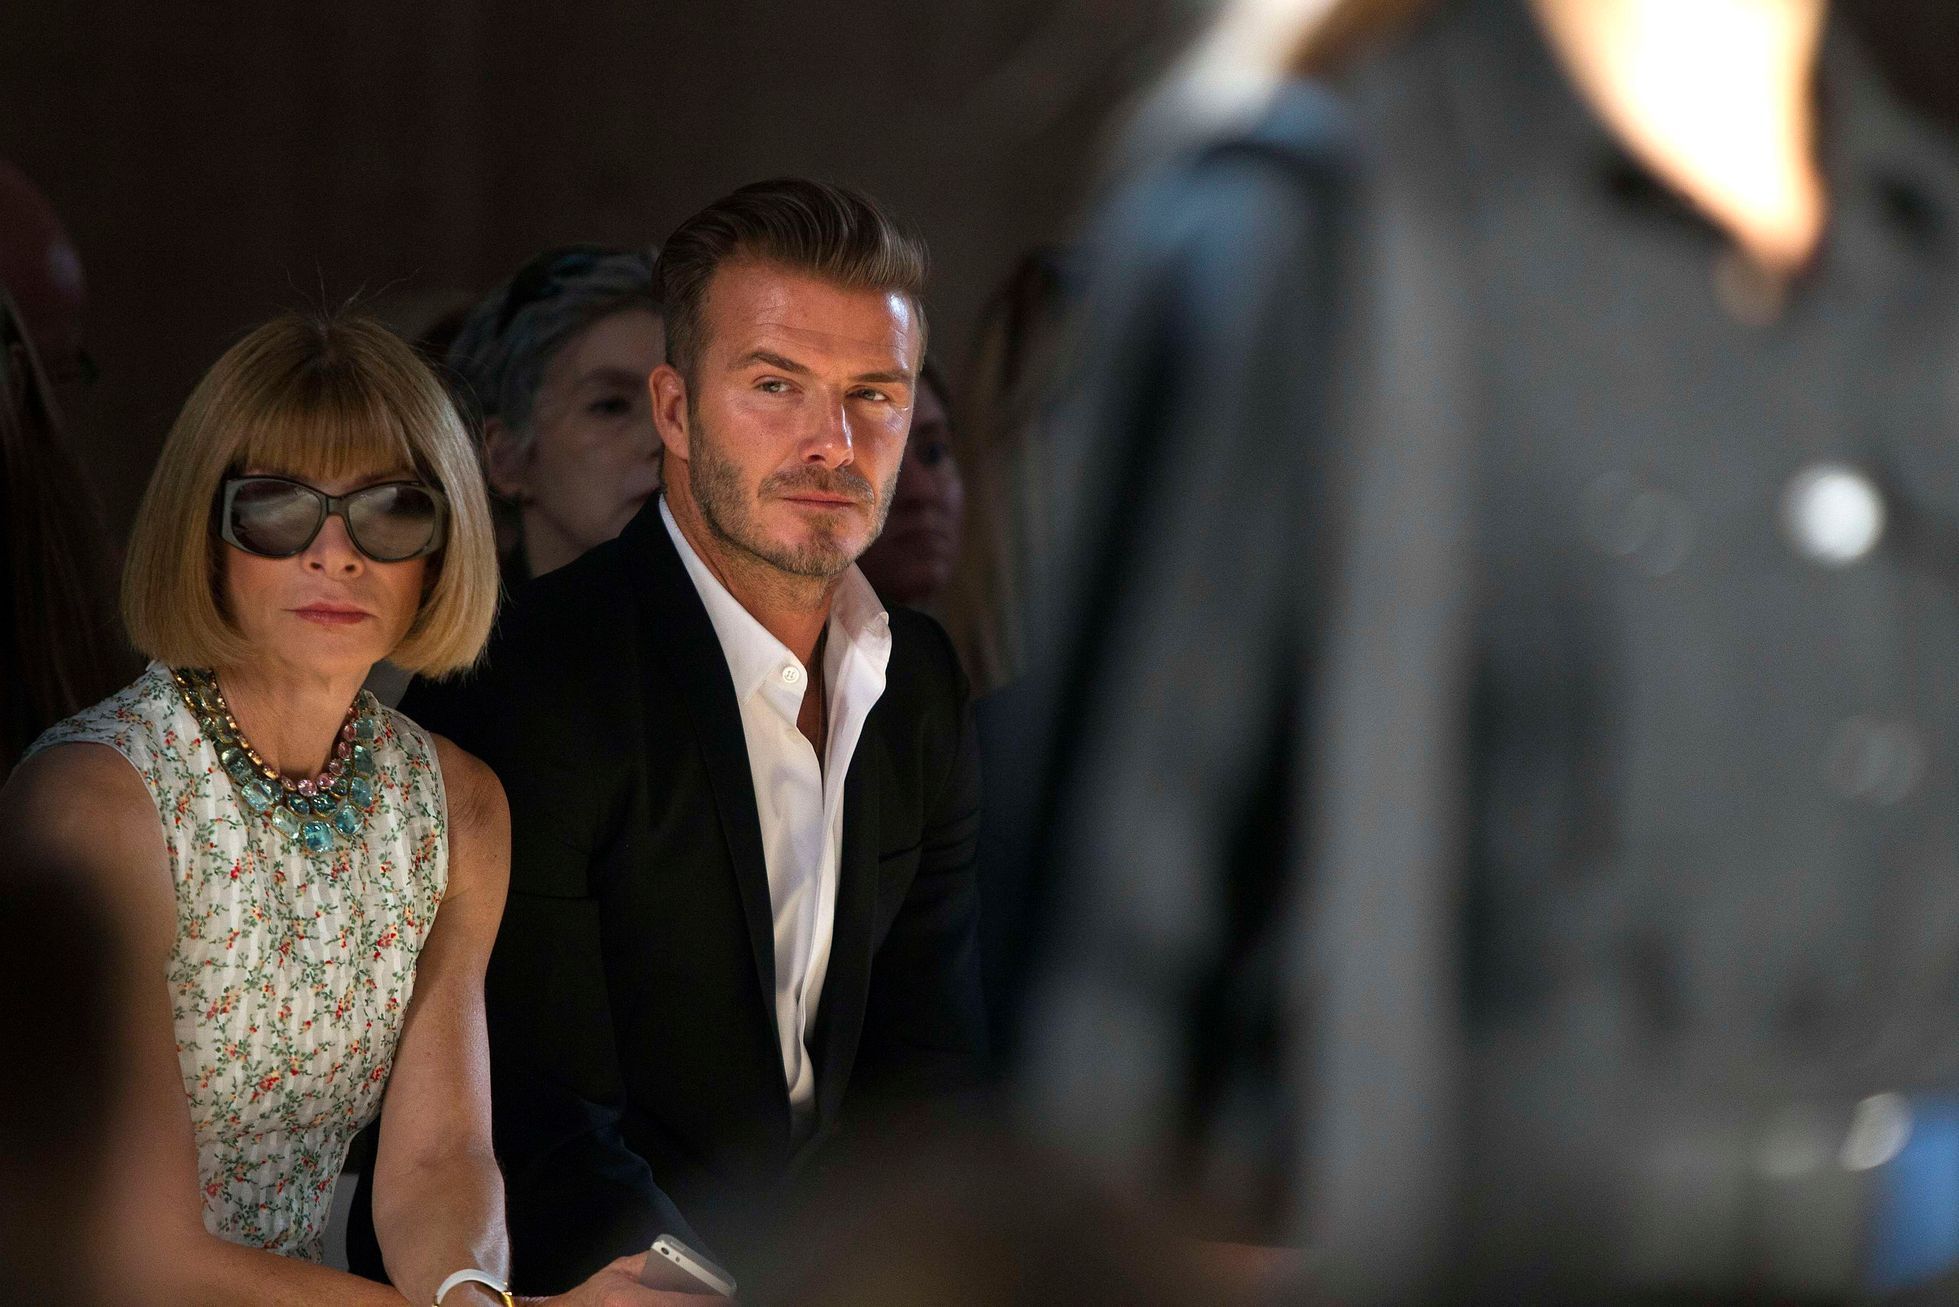 Vogue editor Anna Wintour (L) and David Beckham watch as a model presents a creation during the Victoria Beckham Spring/Summer 2015 collection during New York Fashion Week in the Manhattan borough of